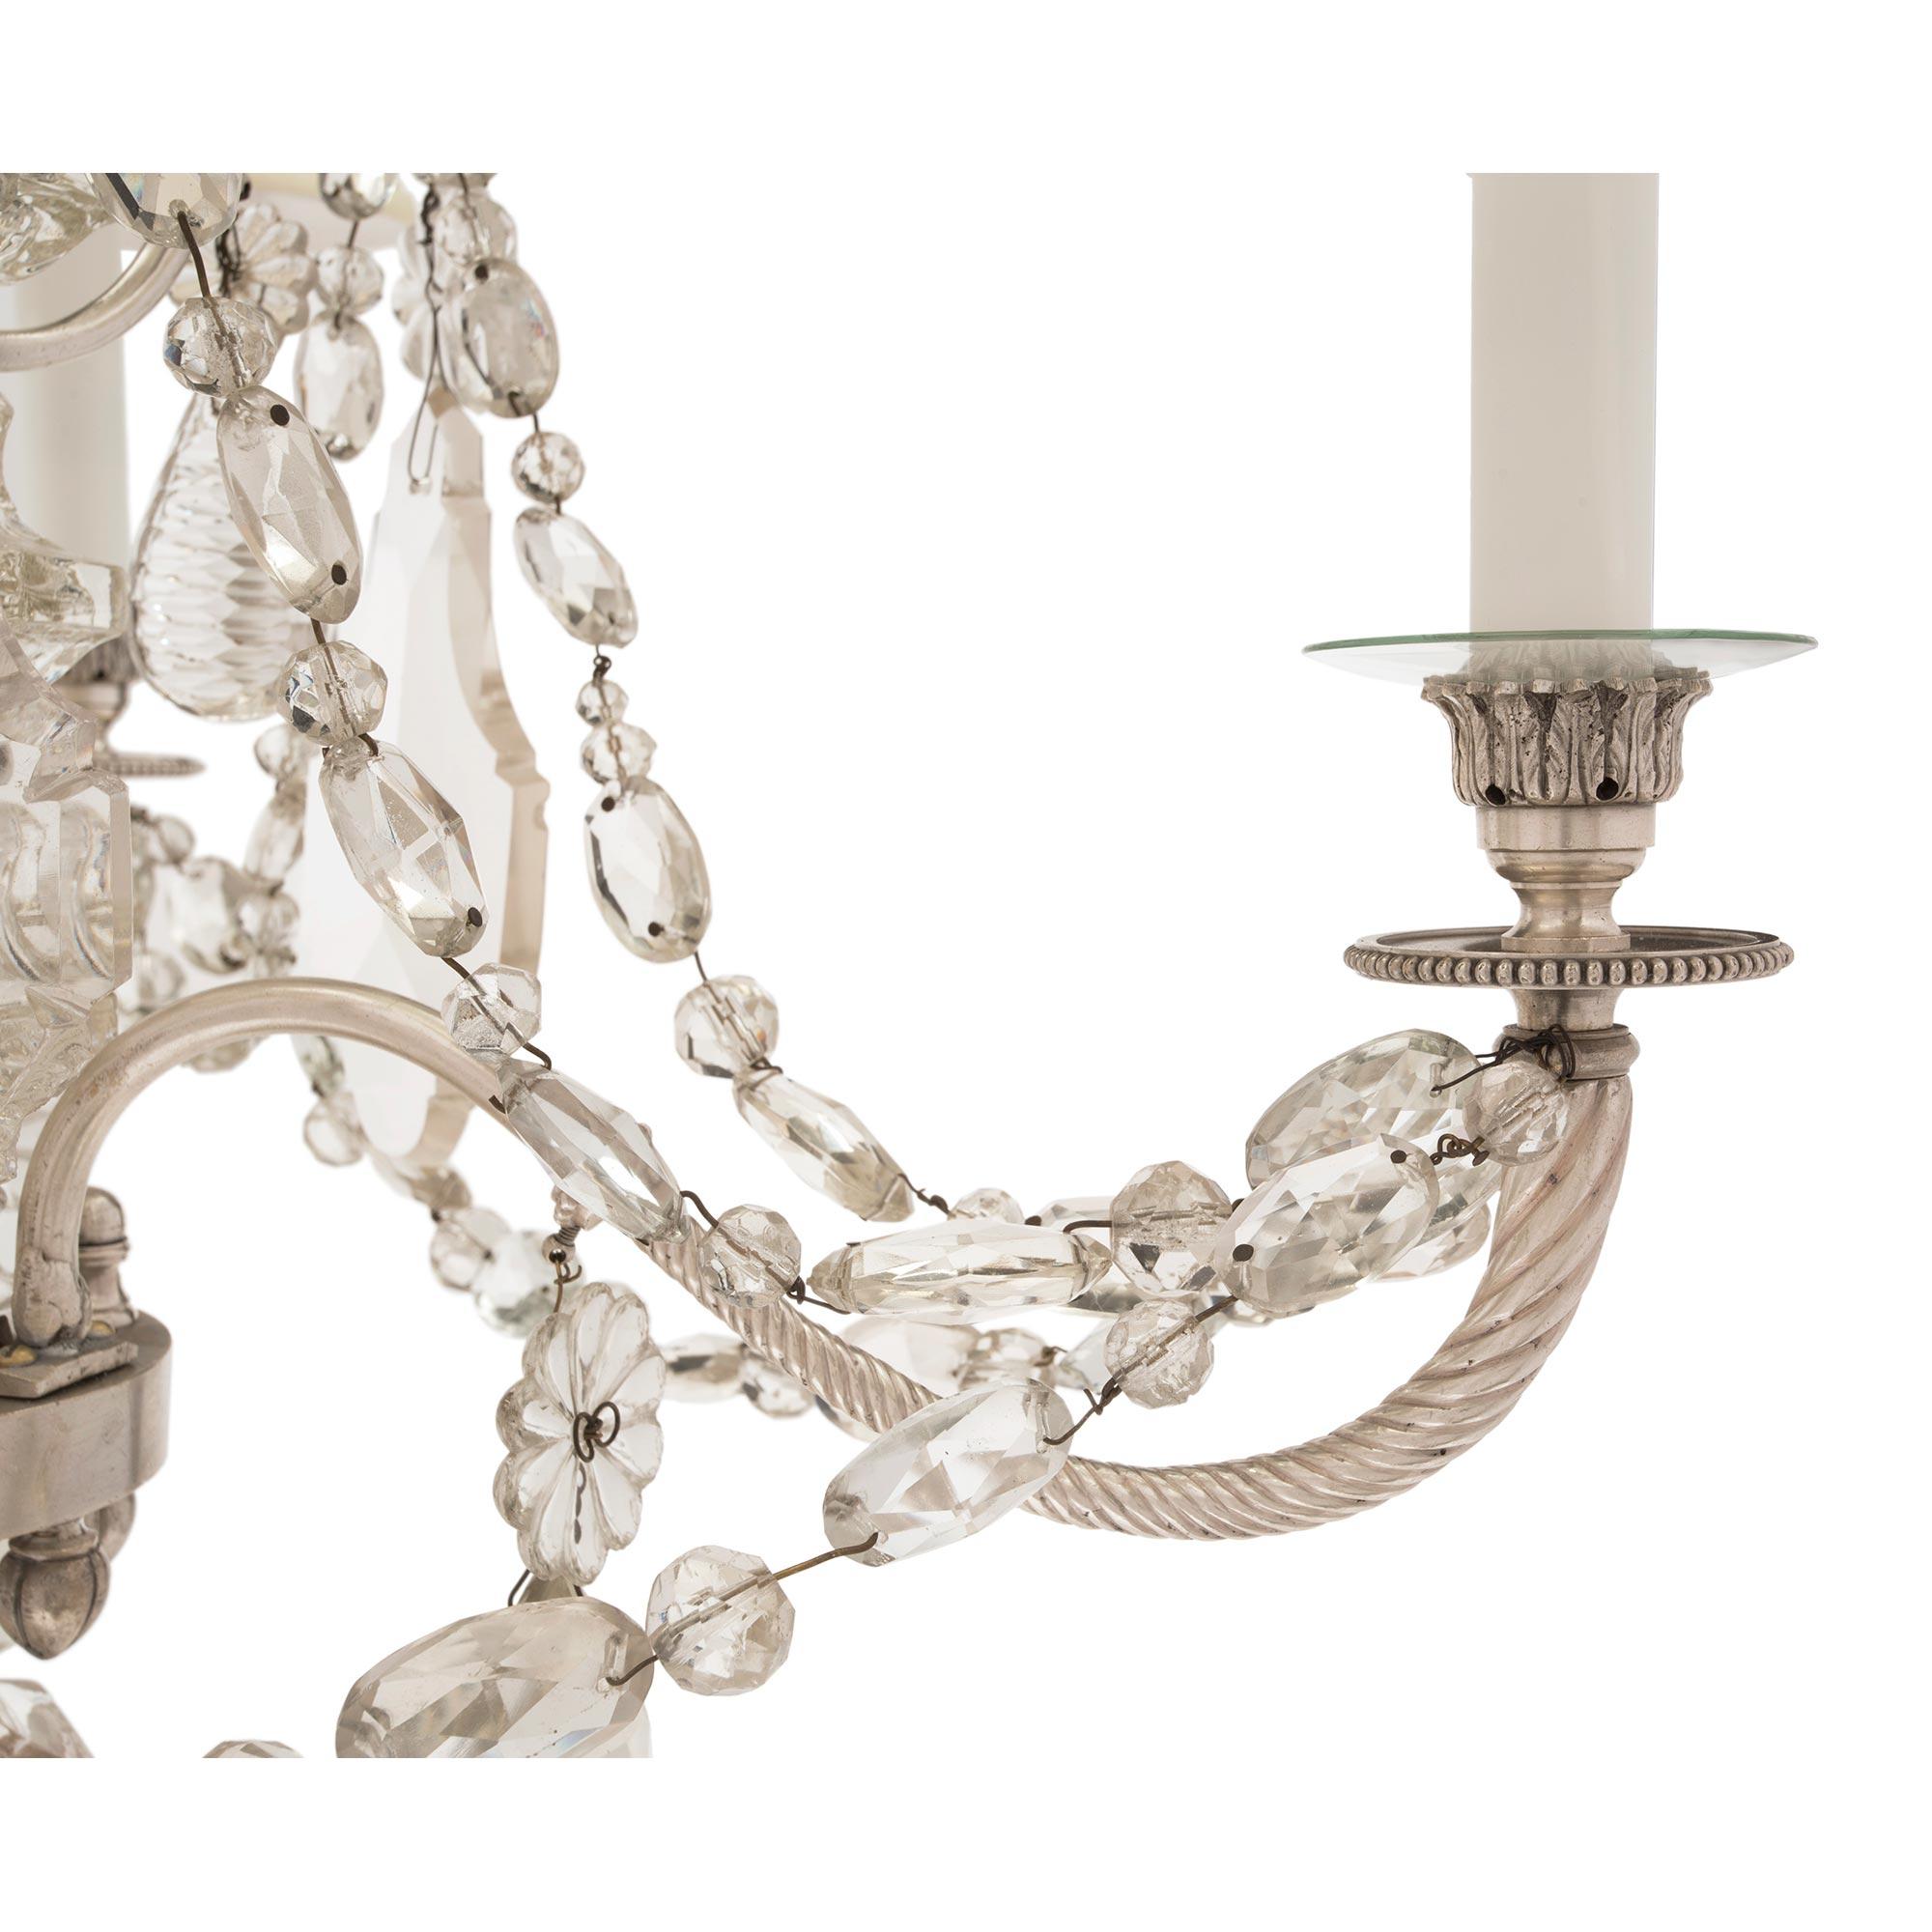 French Mid-19th Century Louis XVI Style Baccarat Crystal and Bronze Chandelier For Sale 3